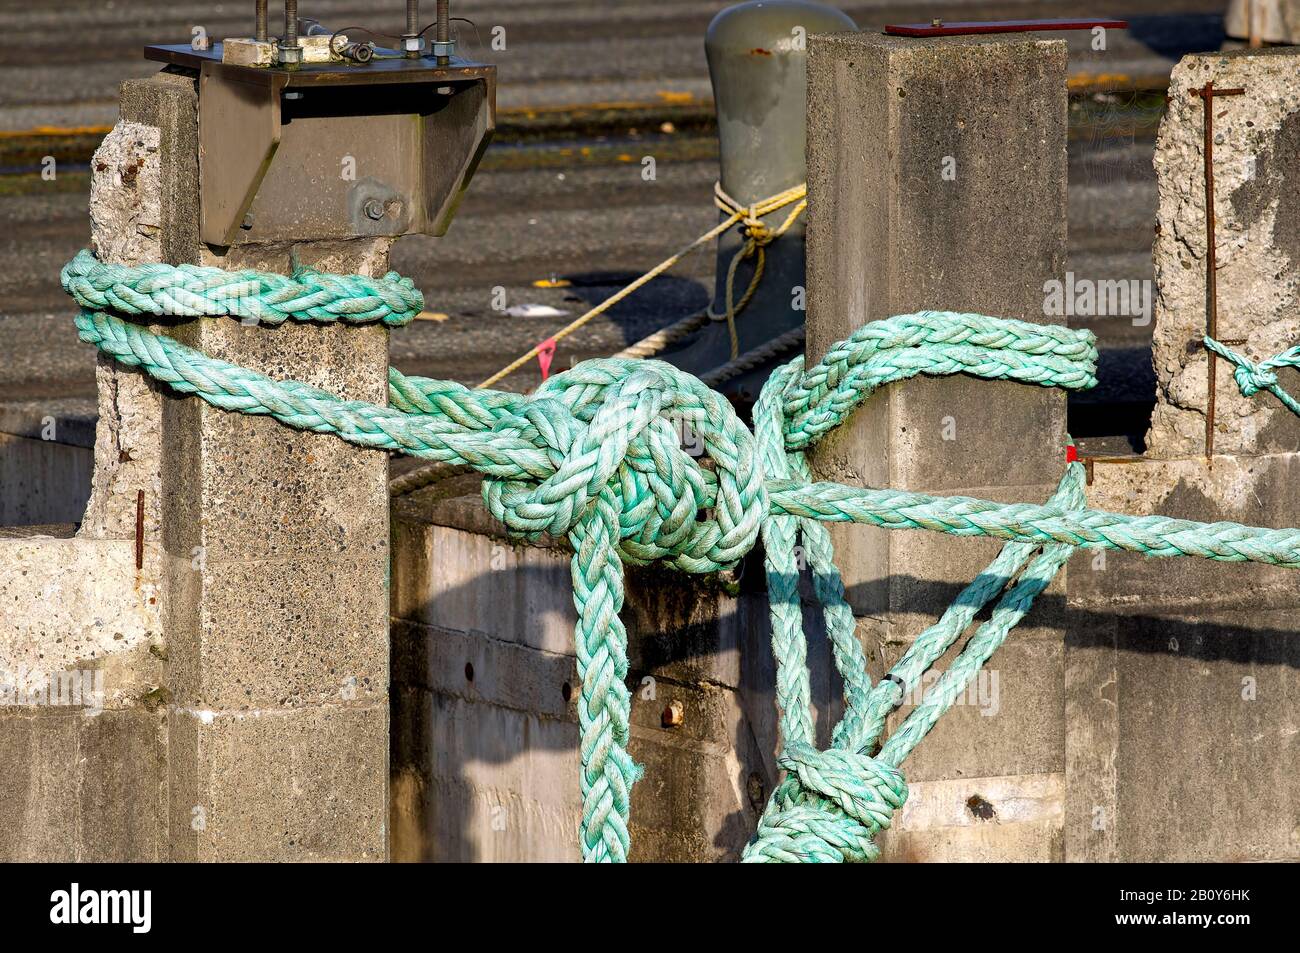 A knotted green nylon rope tied around two cement pillars. Stock Photo